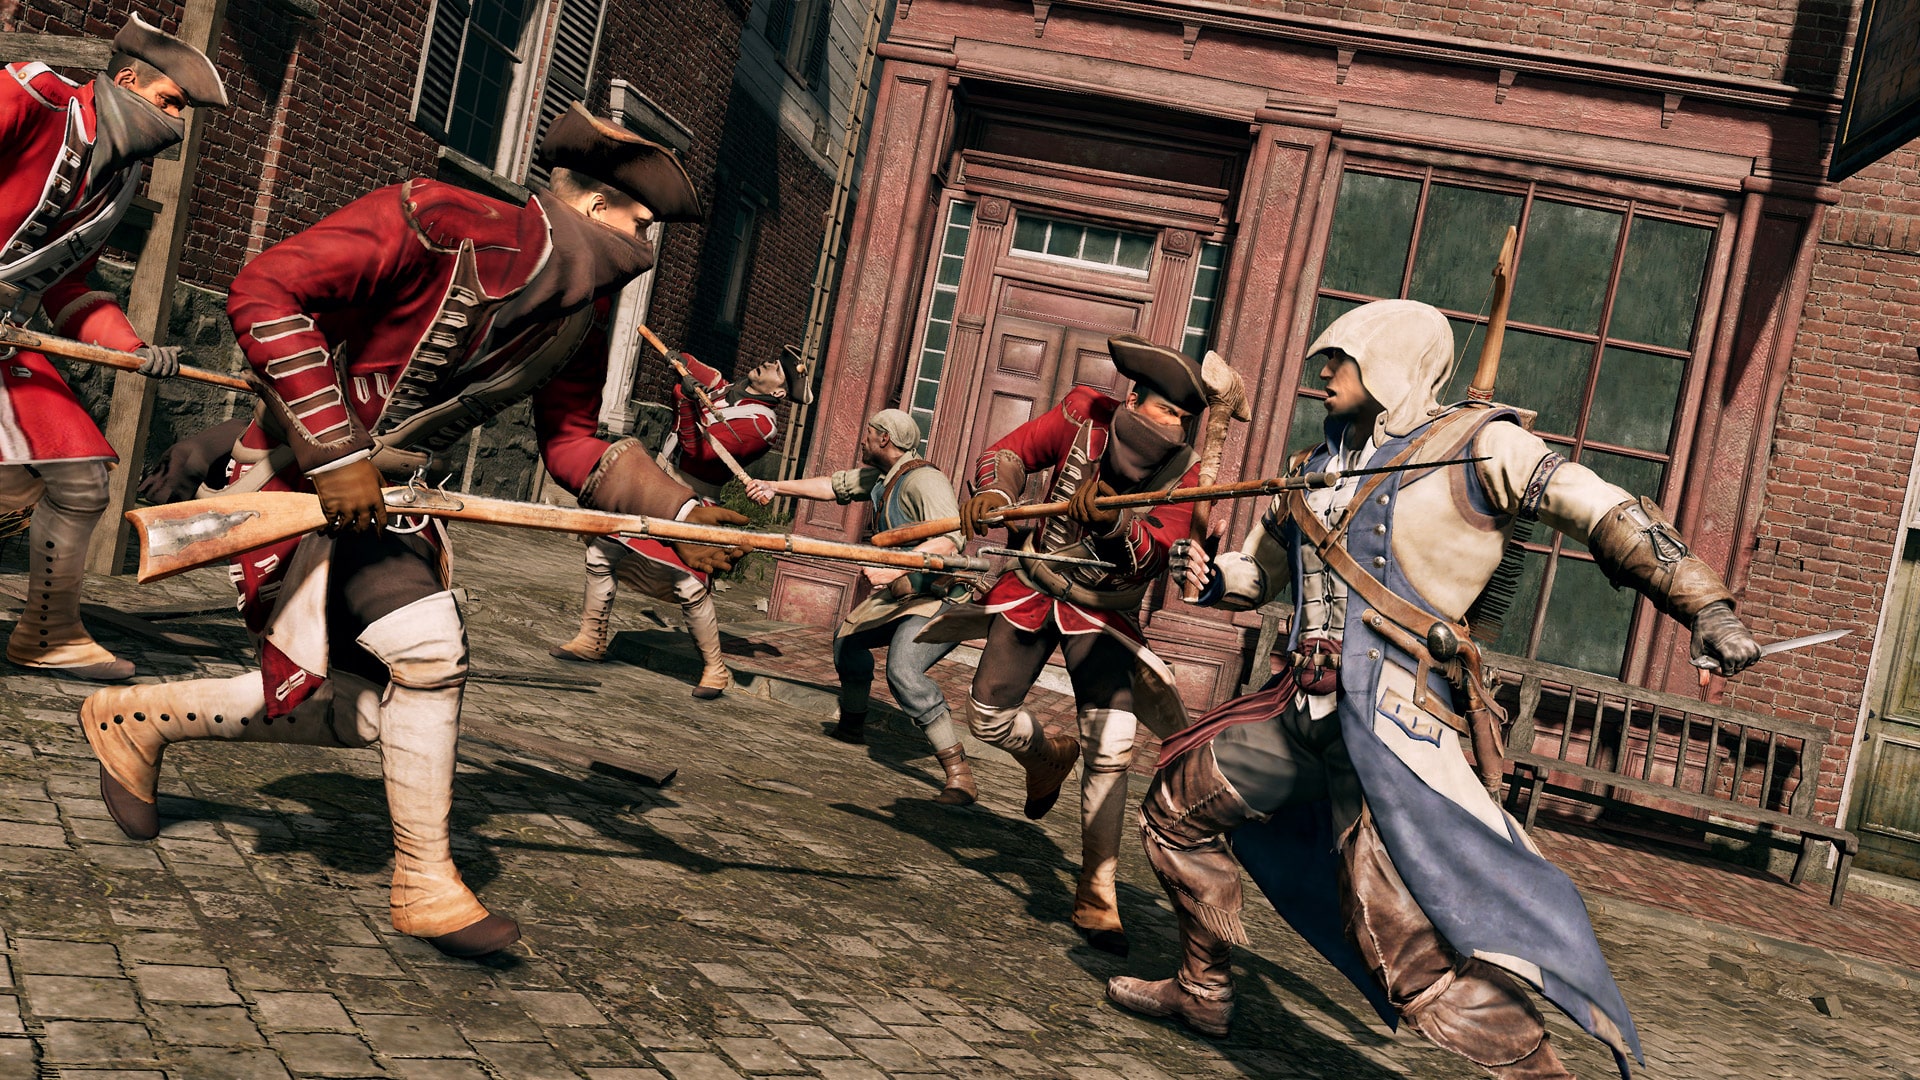  Assassin's Creed III Remastered & Liberation Remastered PS4 :  Video Games